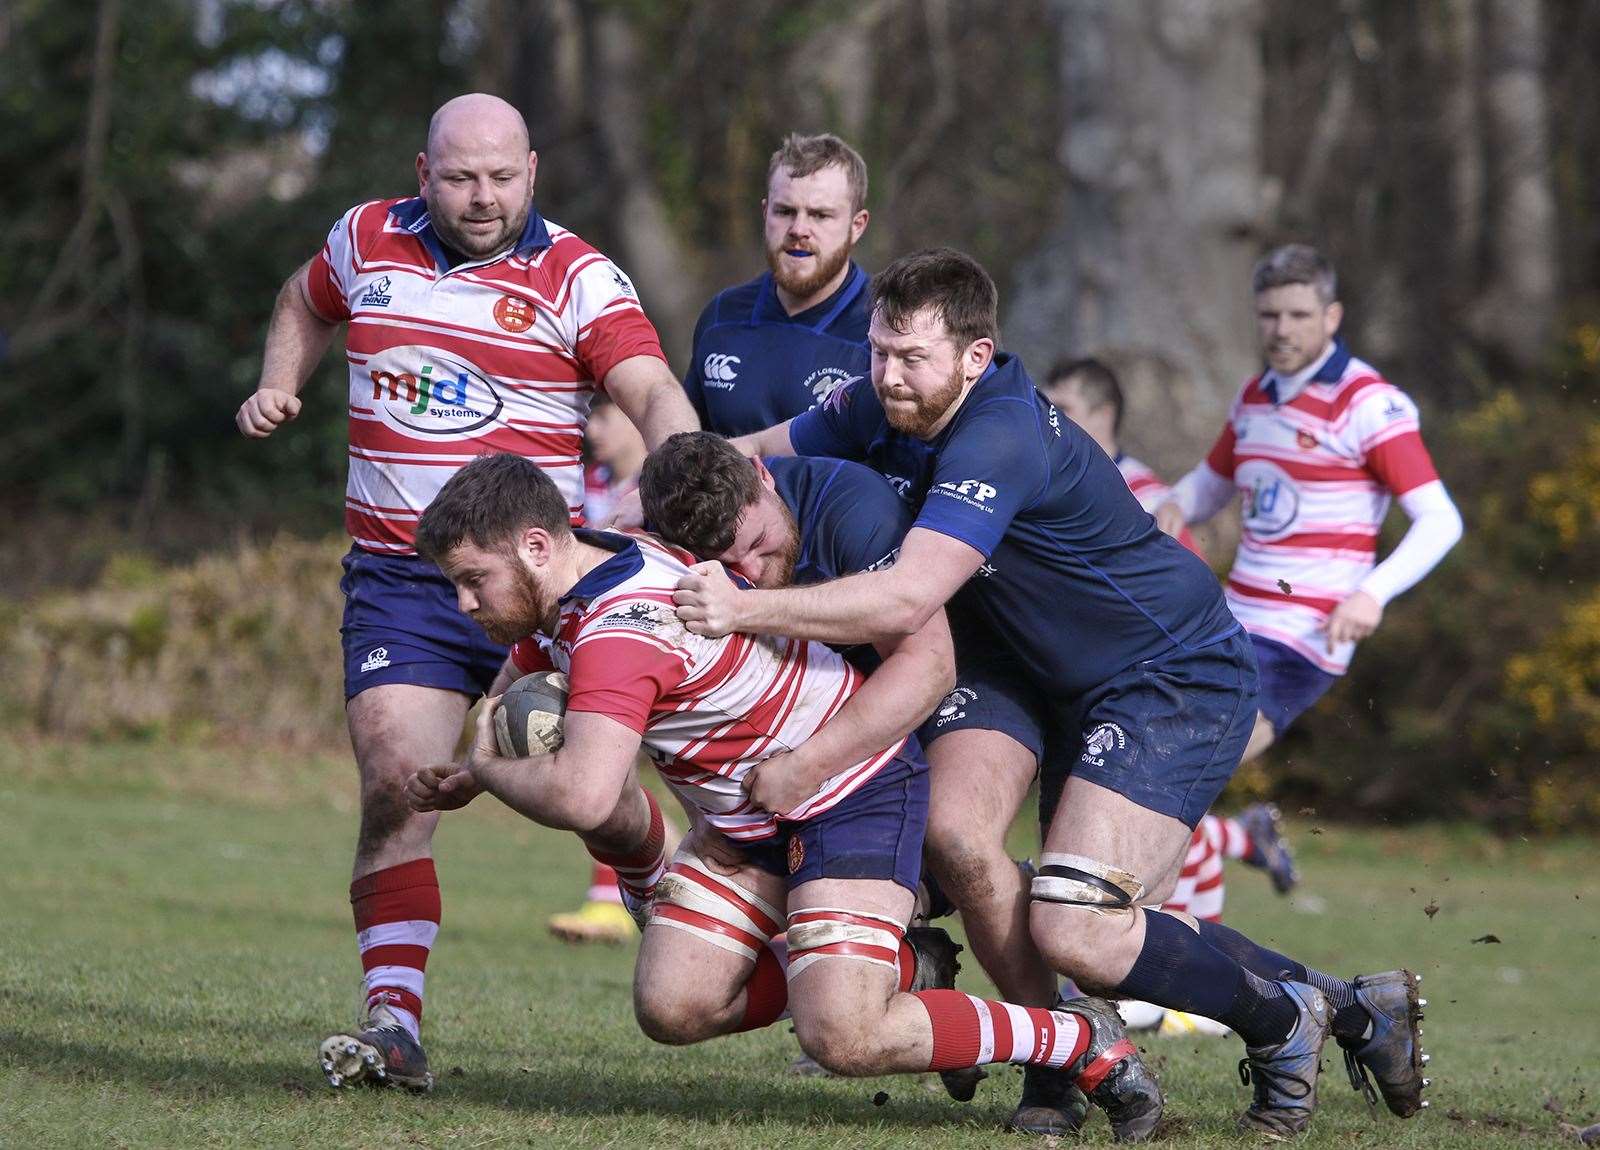 Neil Alexander drives taking two defenders with him. Marc Higgins coming in to support. Picture: John MacGregor